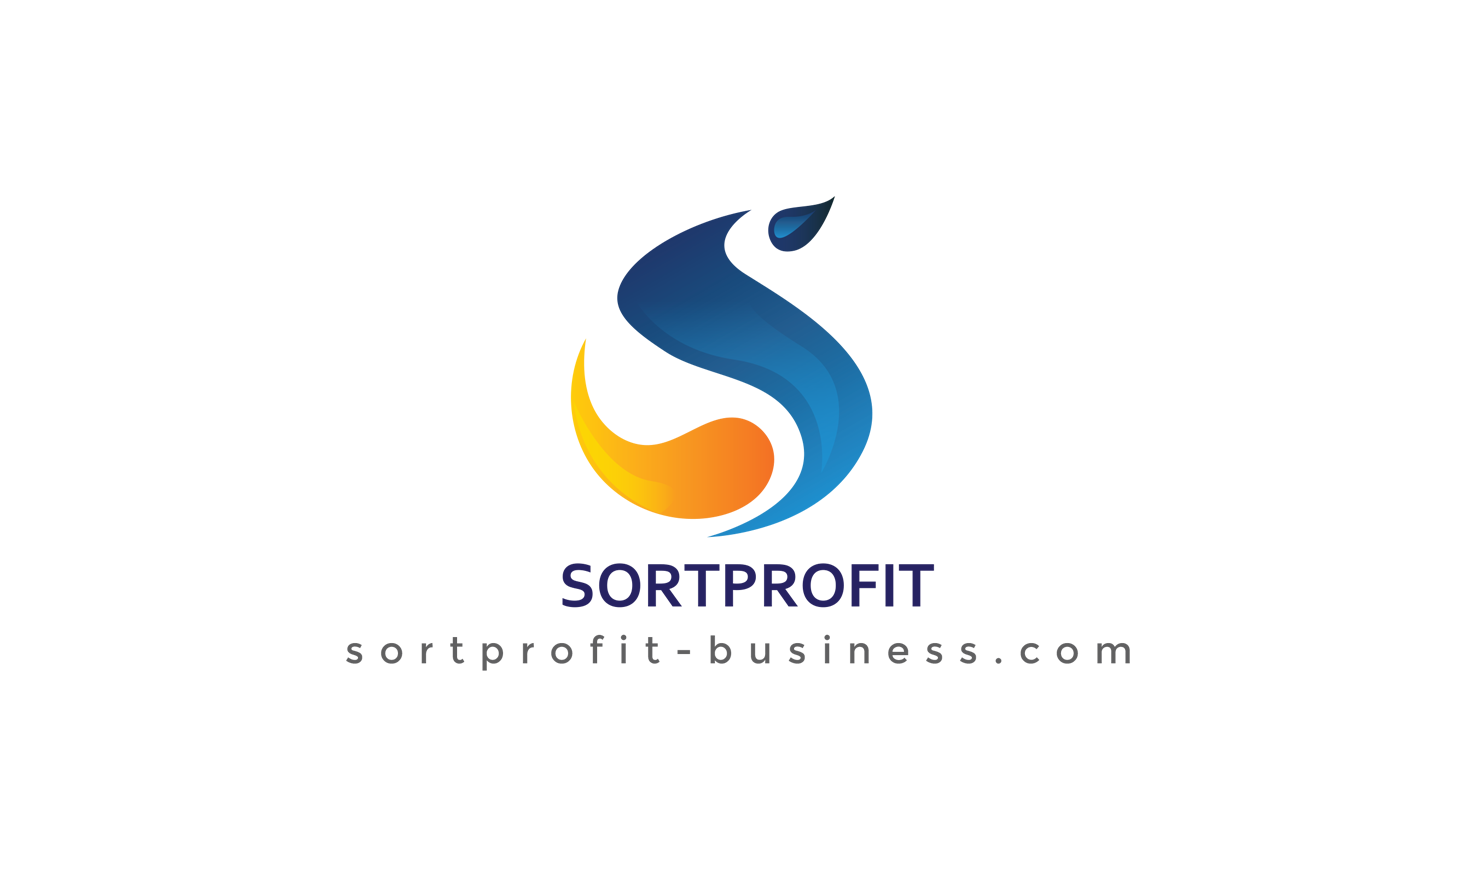 Sort Profit - The biggest event in the world.